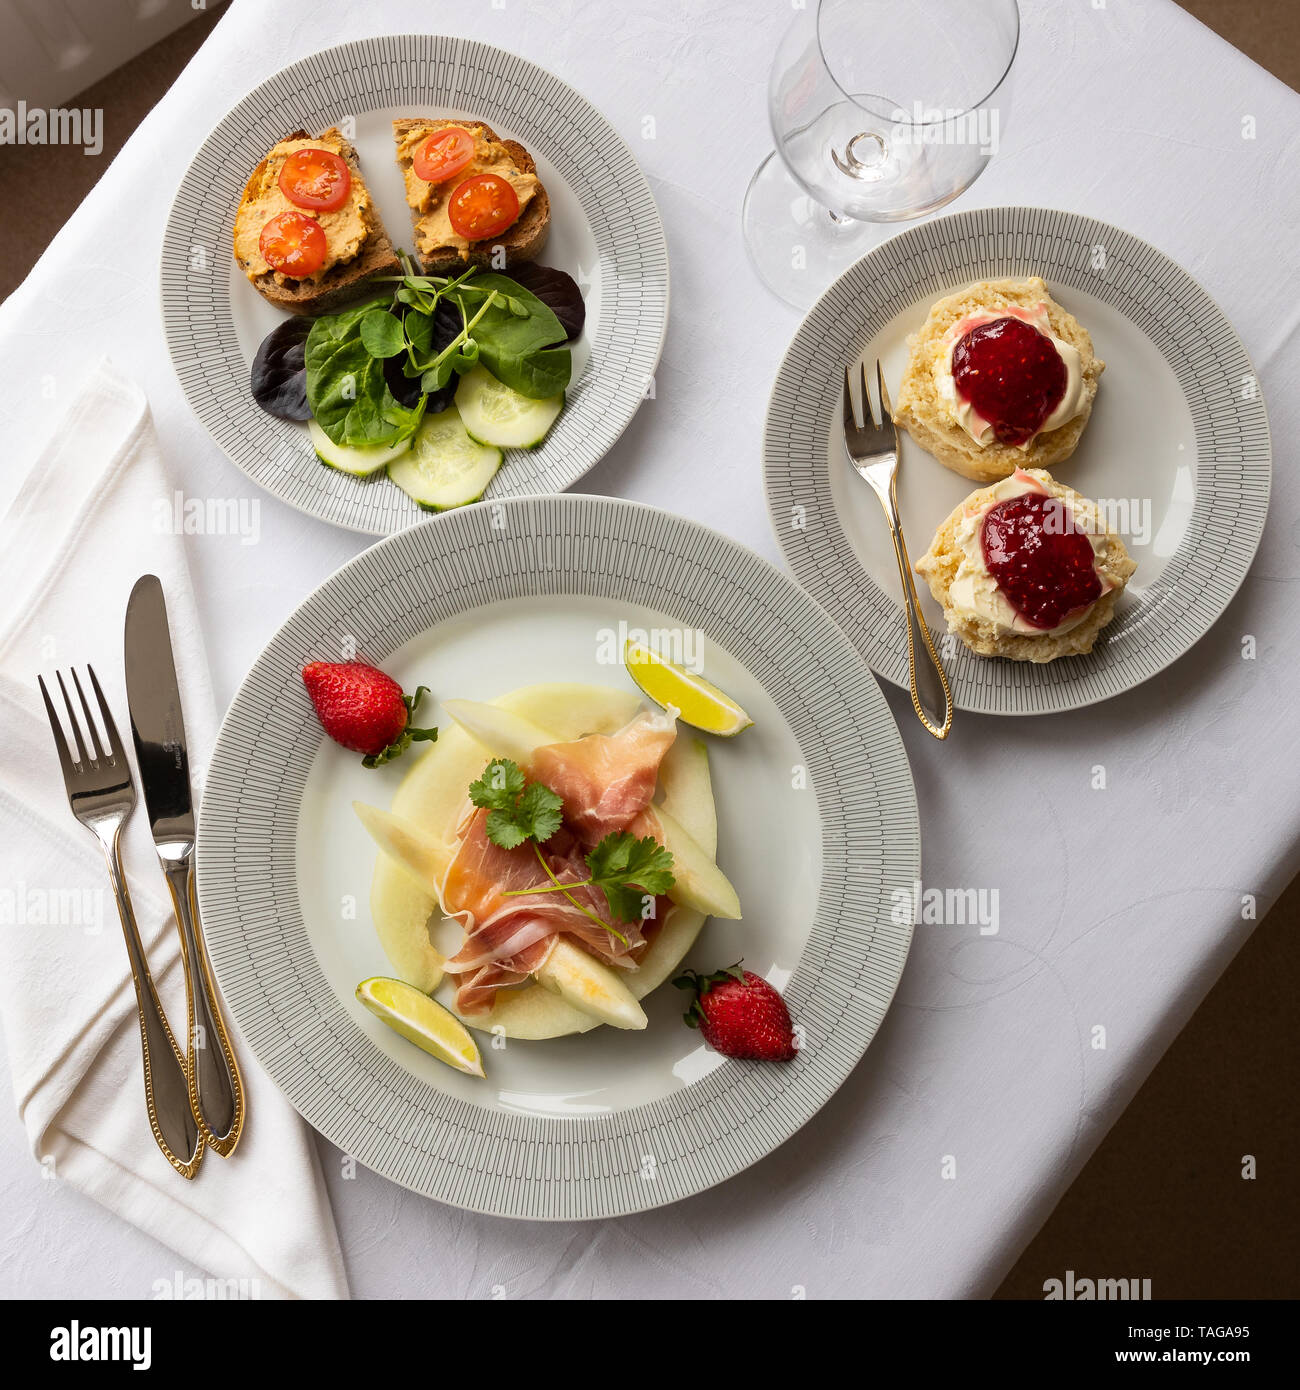 Mixed starters and desert on tablecloth Stock Photo